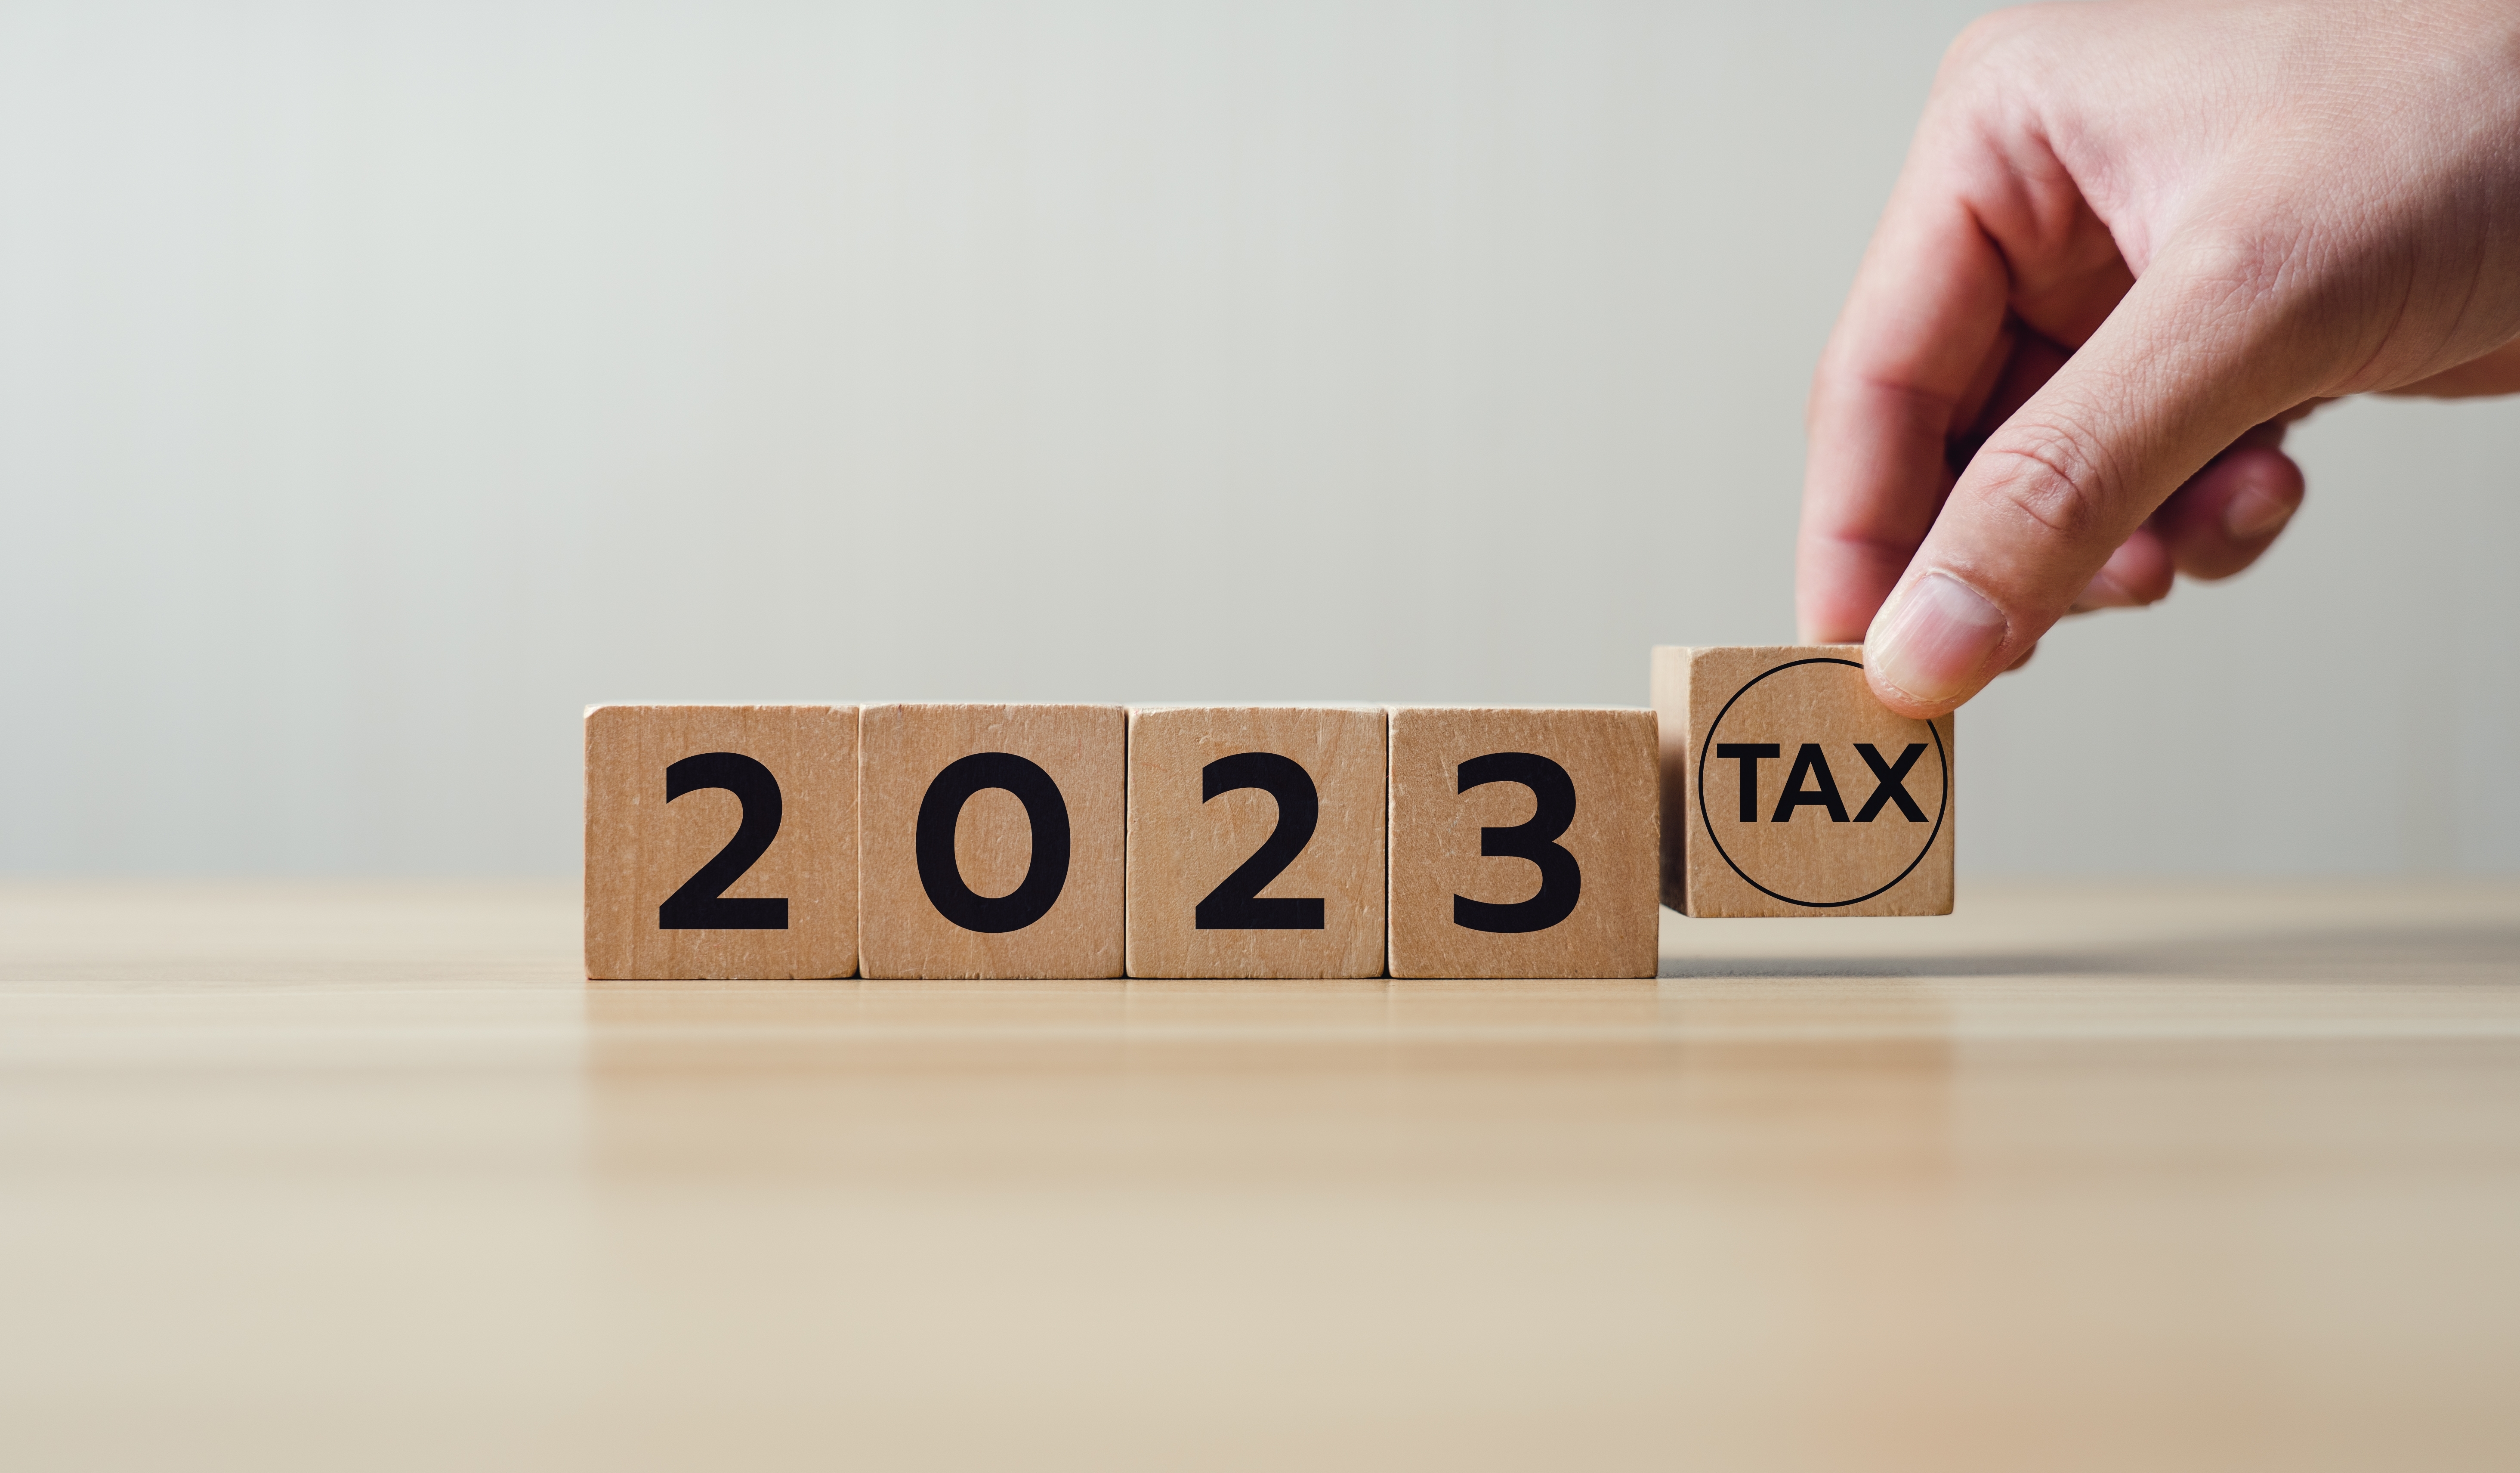 Who will not be required to file taxes in the United States in 2023